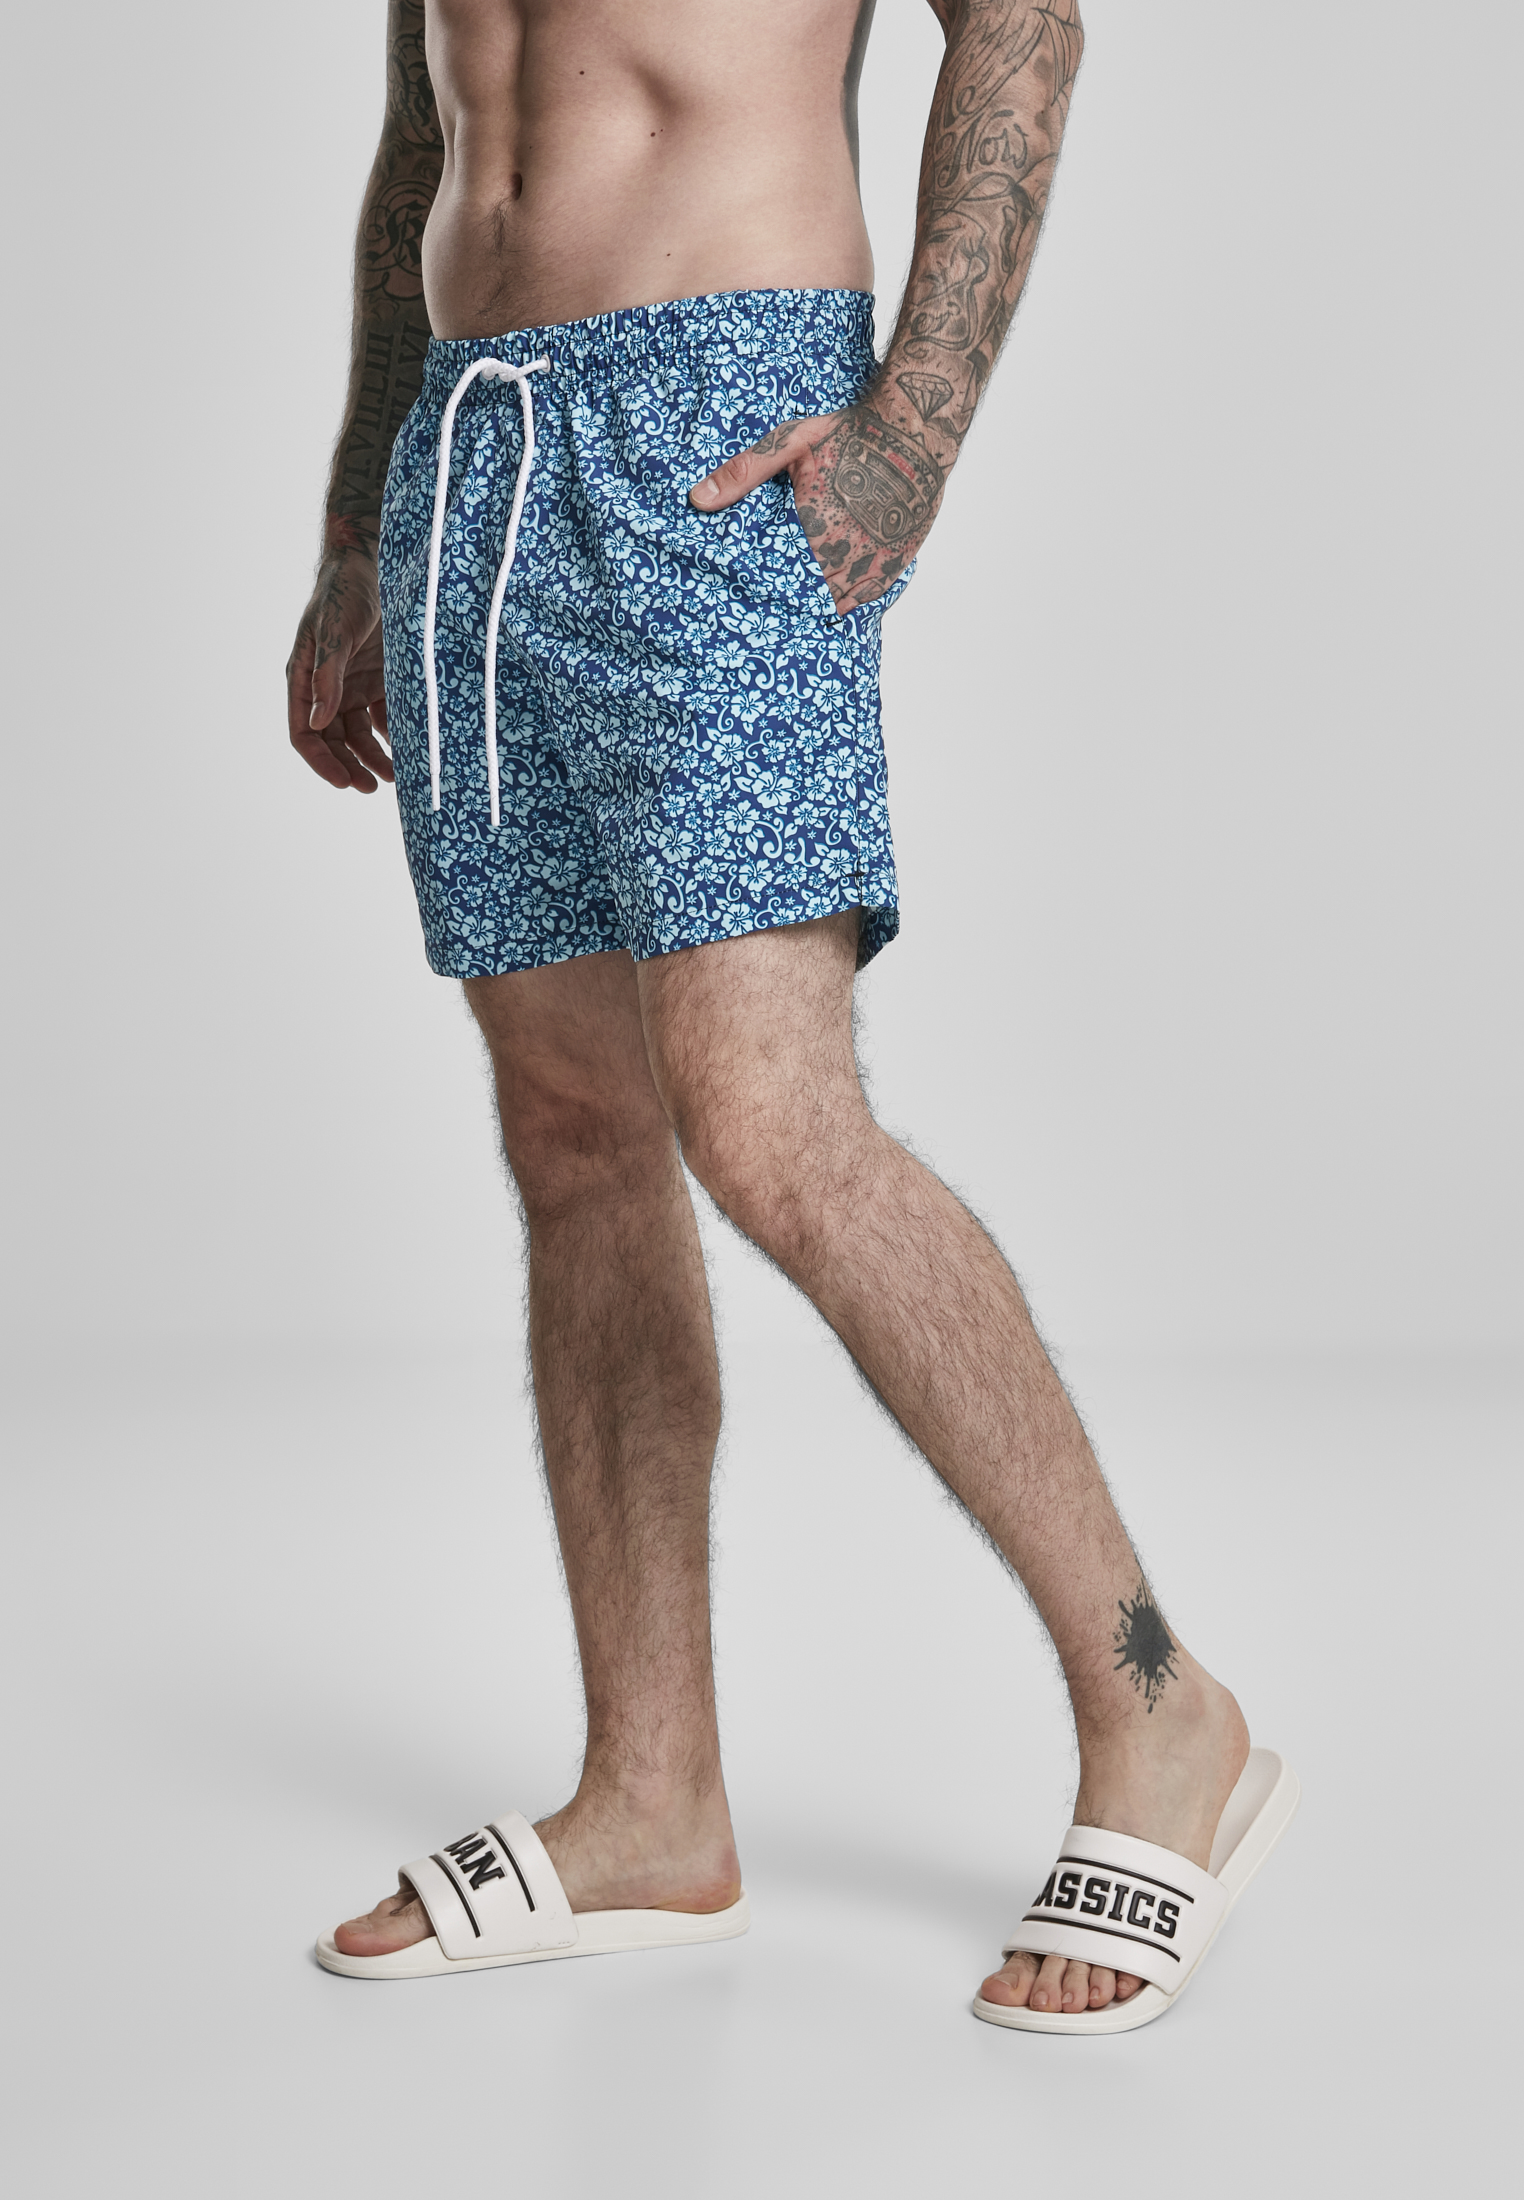 Bademode Floral Swim Shorts in Farbe navy